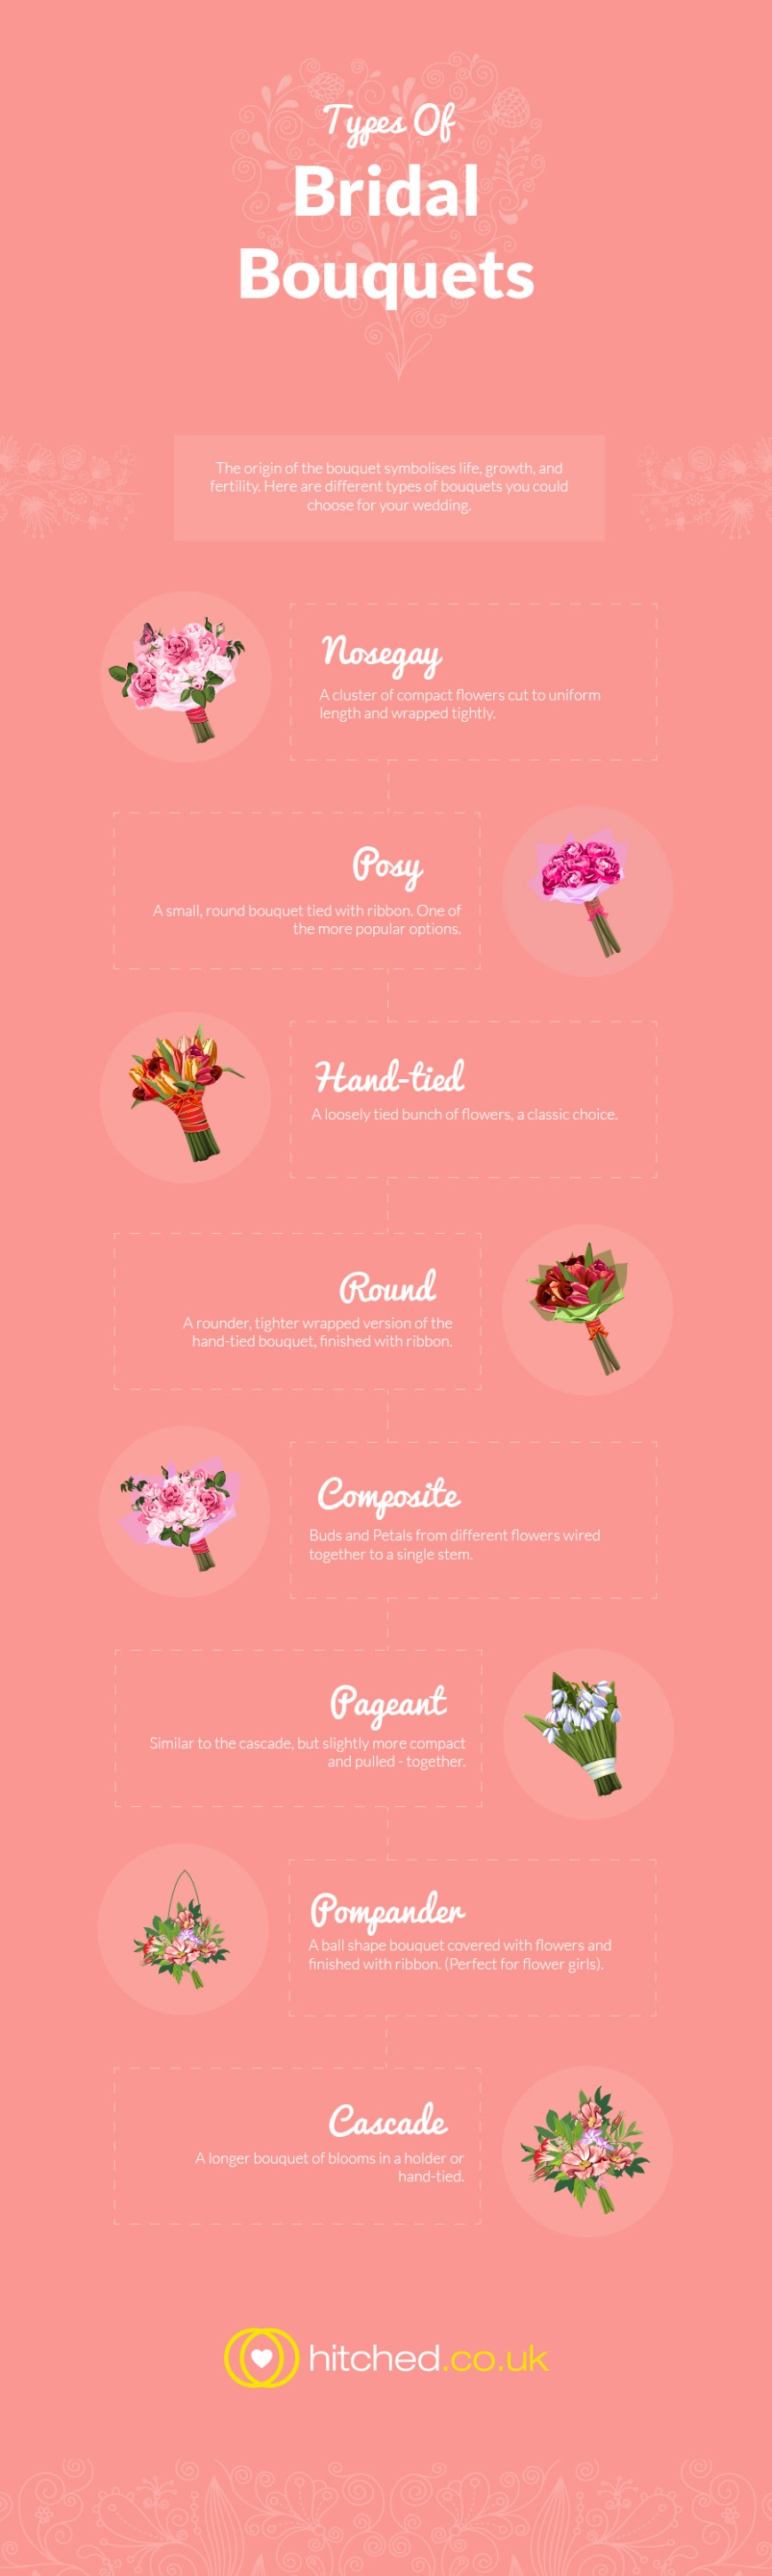 Types of Bridal Bouquets Hitched